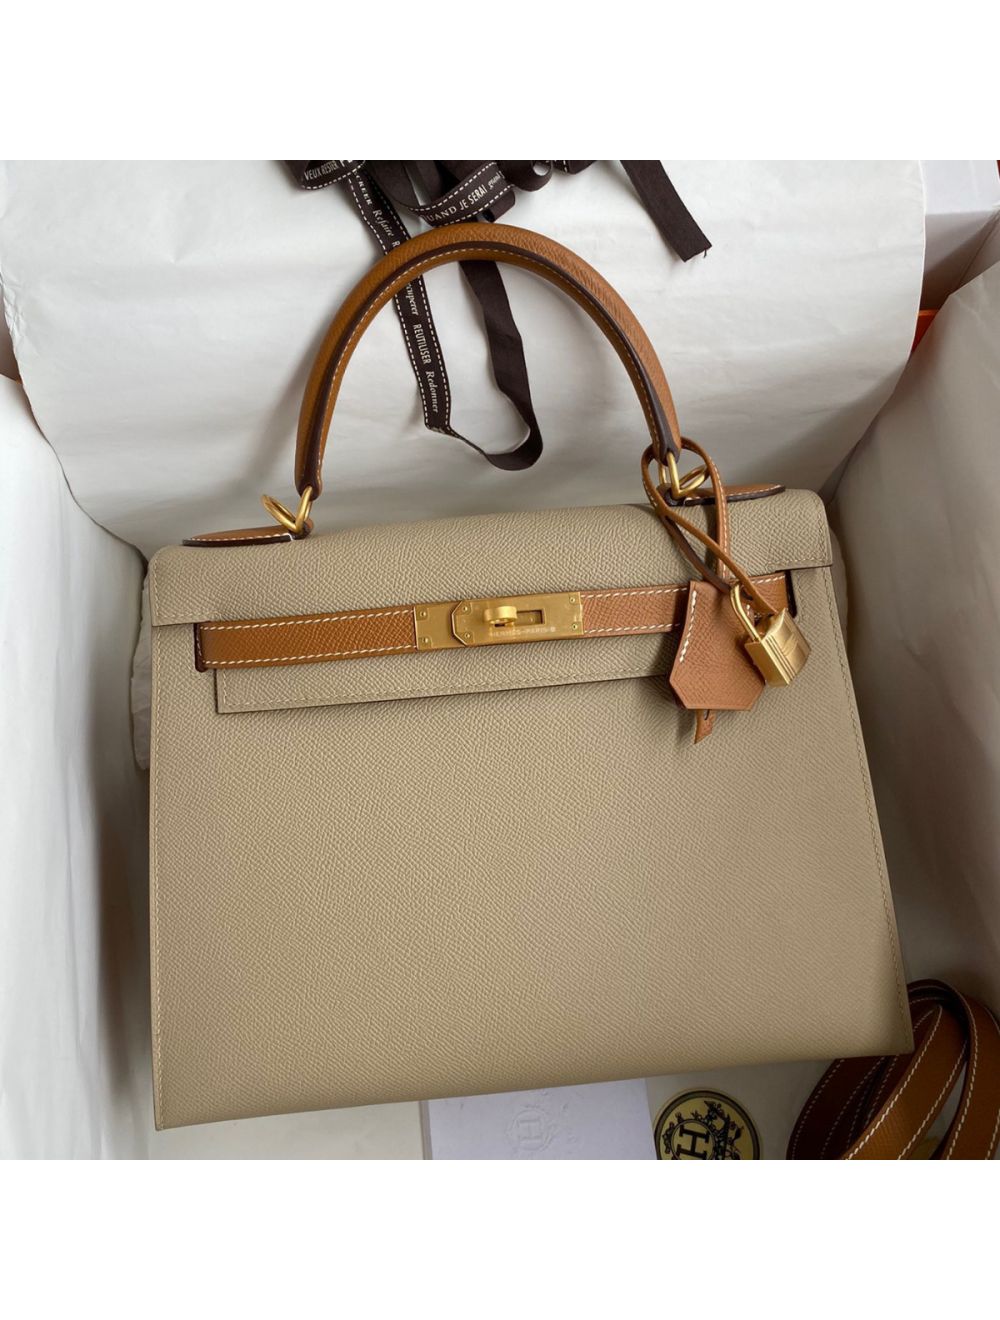 Hermes Lock 18 Bag Trench Gold Hardware Clemence Leather